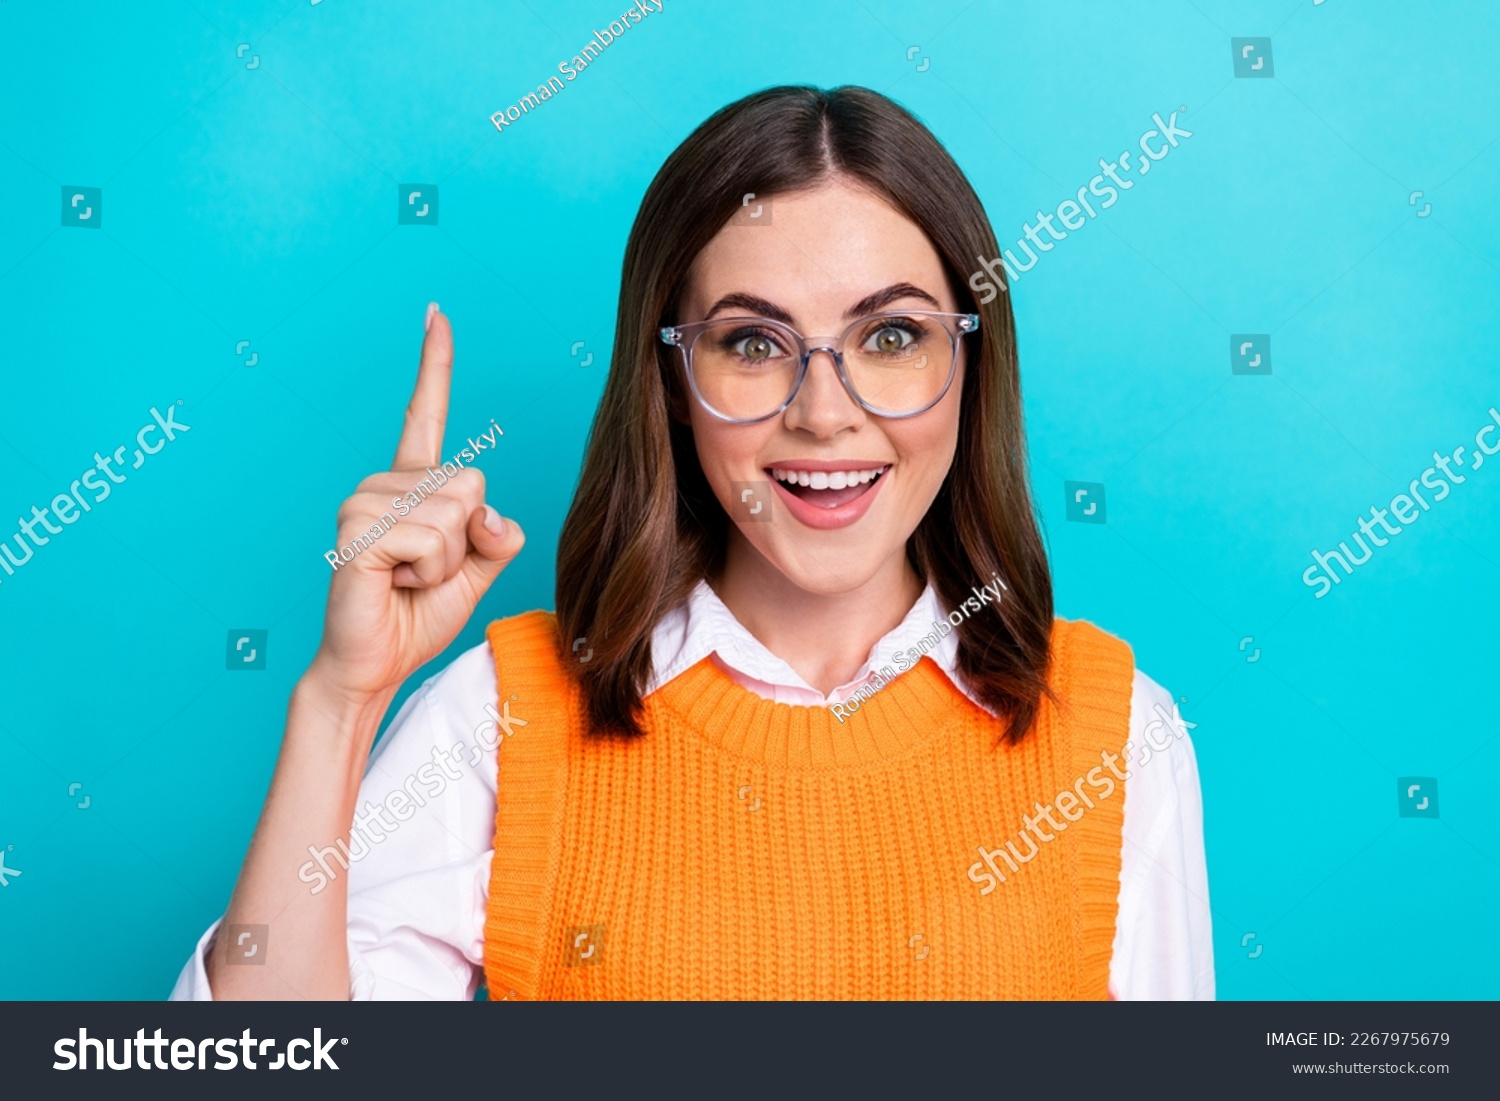 Photo of good mood funny cute clever woman with bob hairstyle orange waistcoat raise finger up good idea isolated on teal color background #2267975679